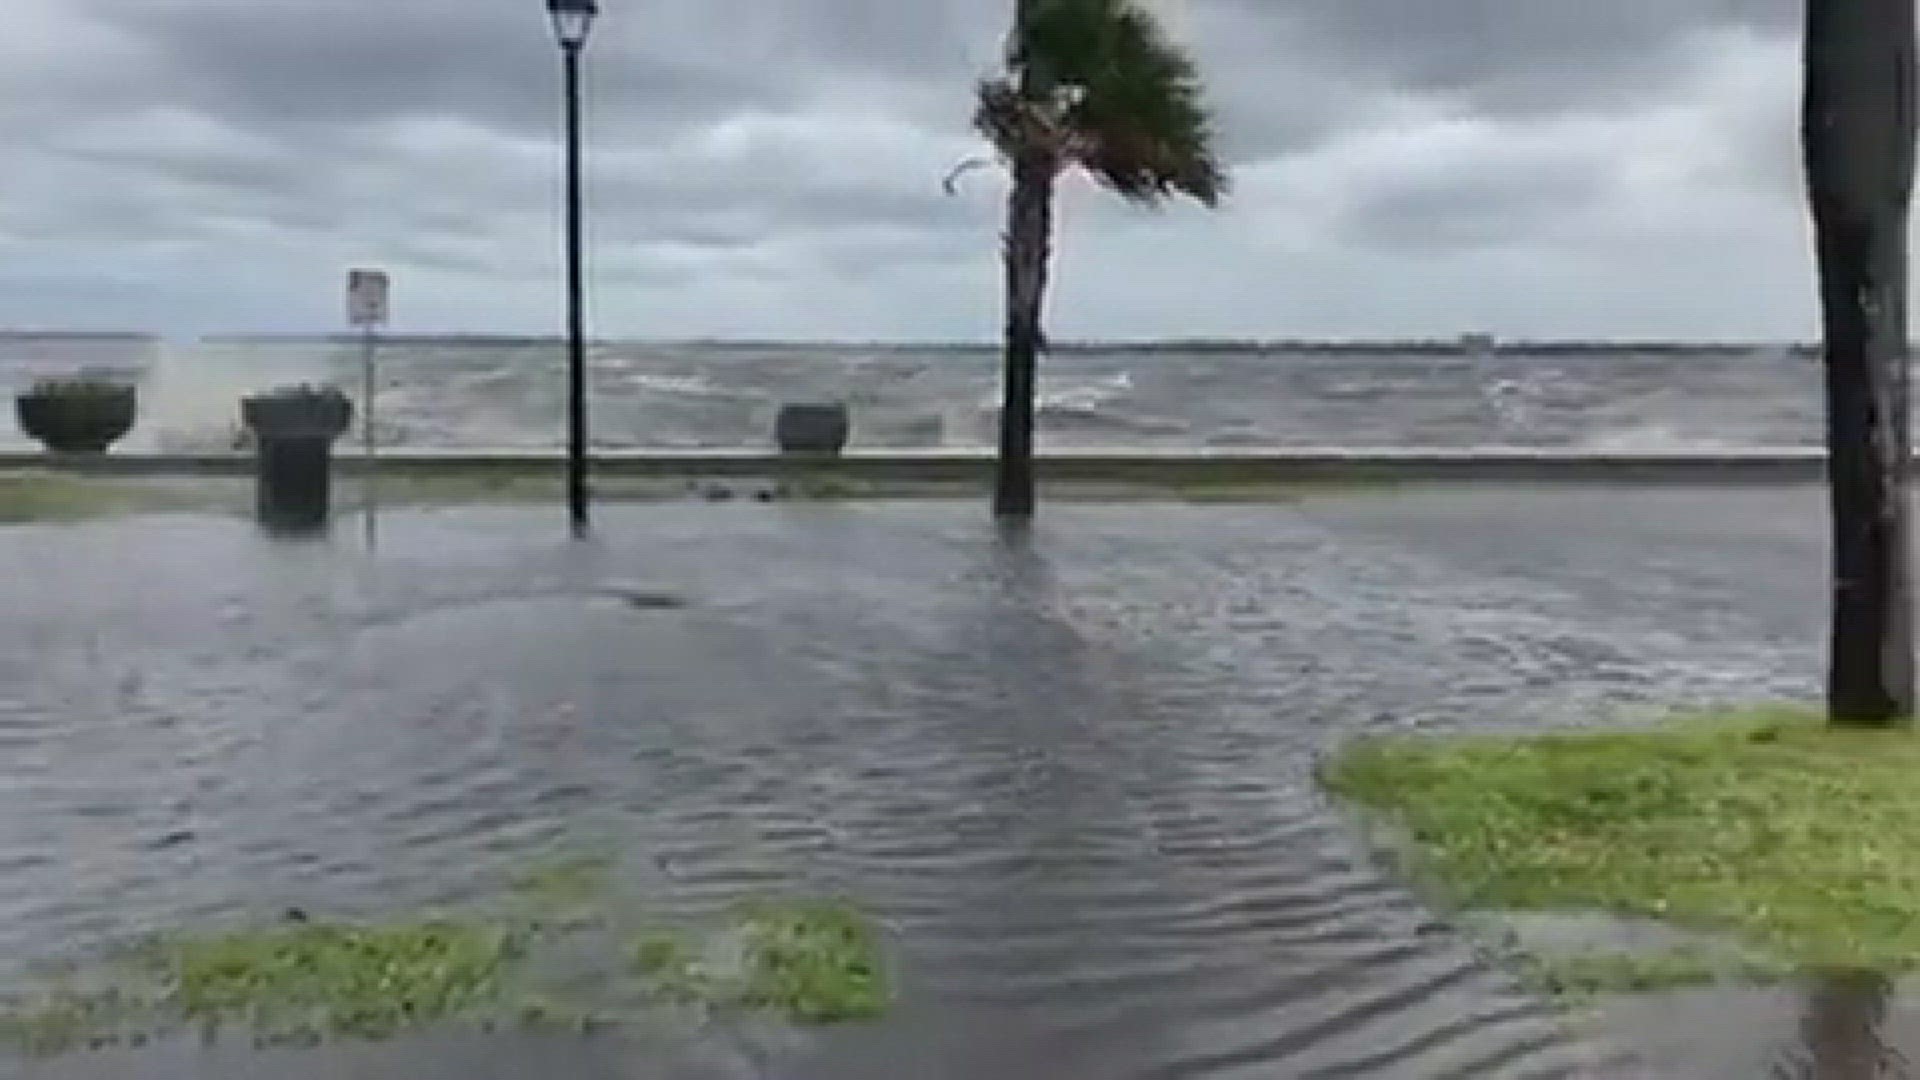 St. John’s River in San Marco
Credit: Atyia Collins